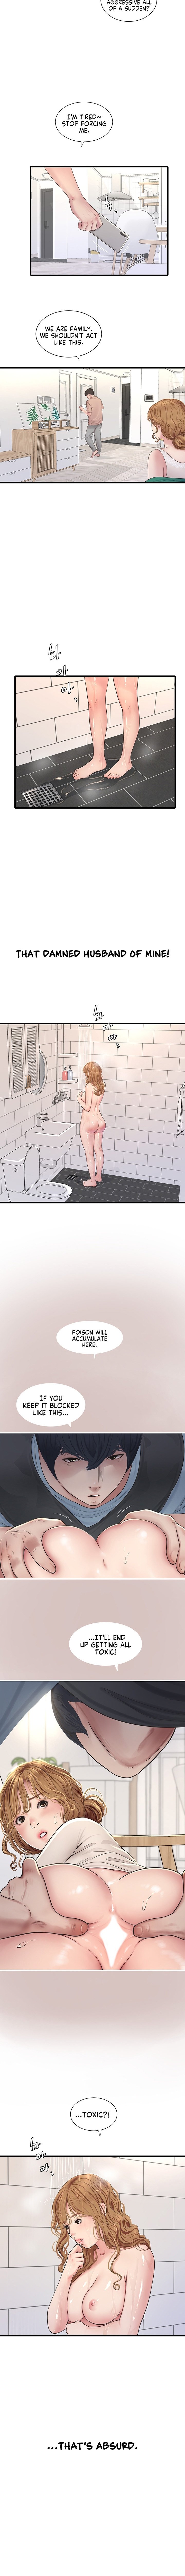 the-hole-diary-chap-3-5